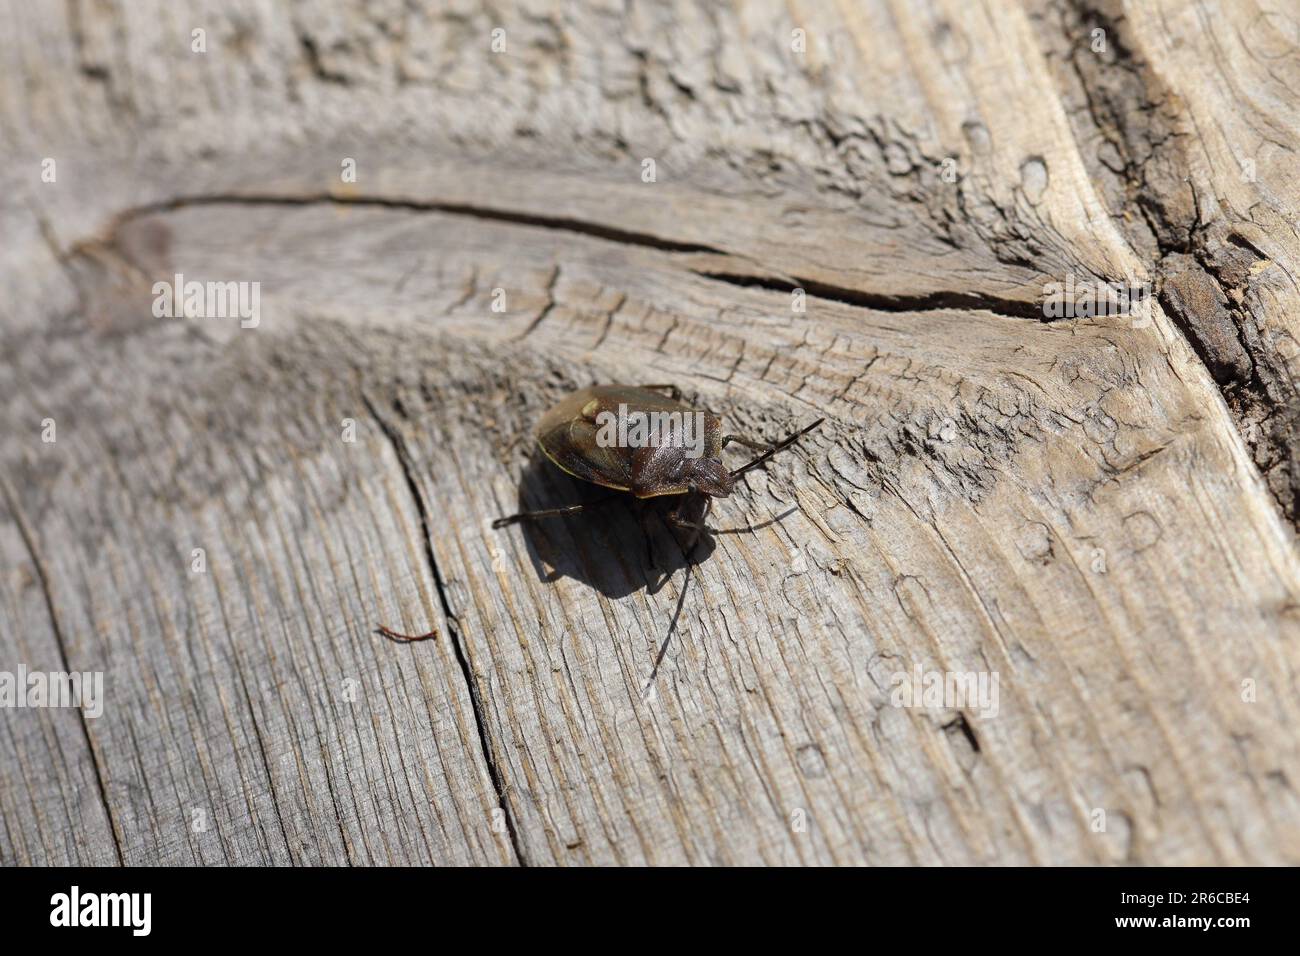 Chlorochroa pinicola, also know as shield bug,  walking on the wood in a swamp area in Finland. Stock Photo